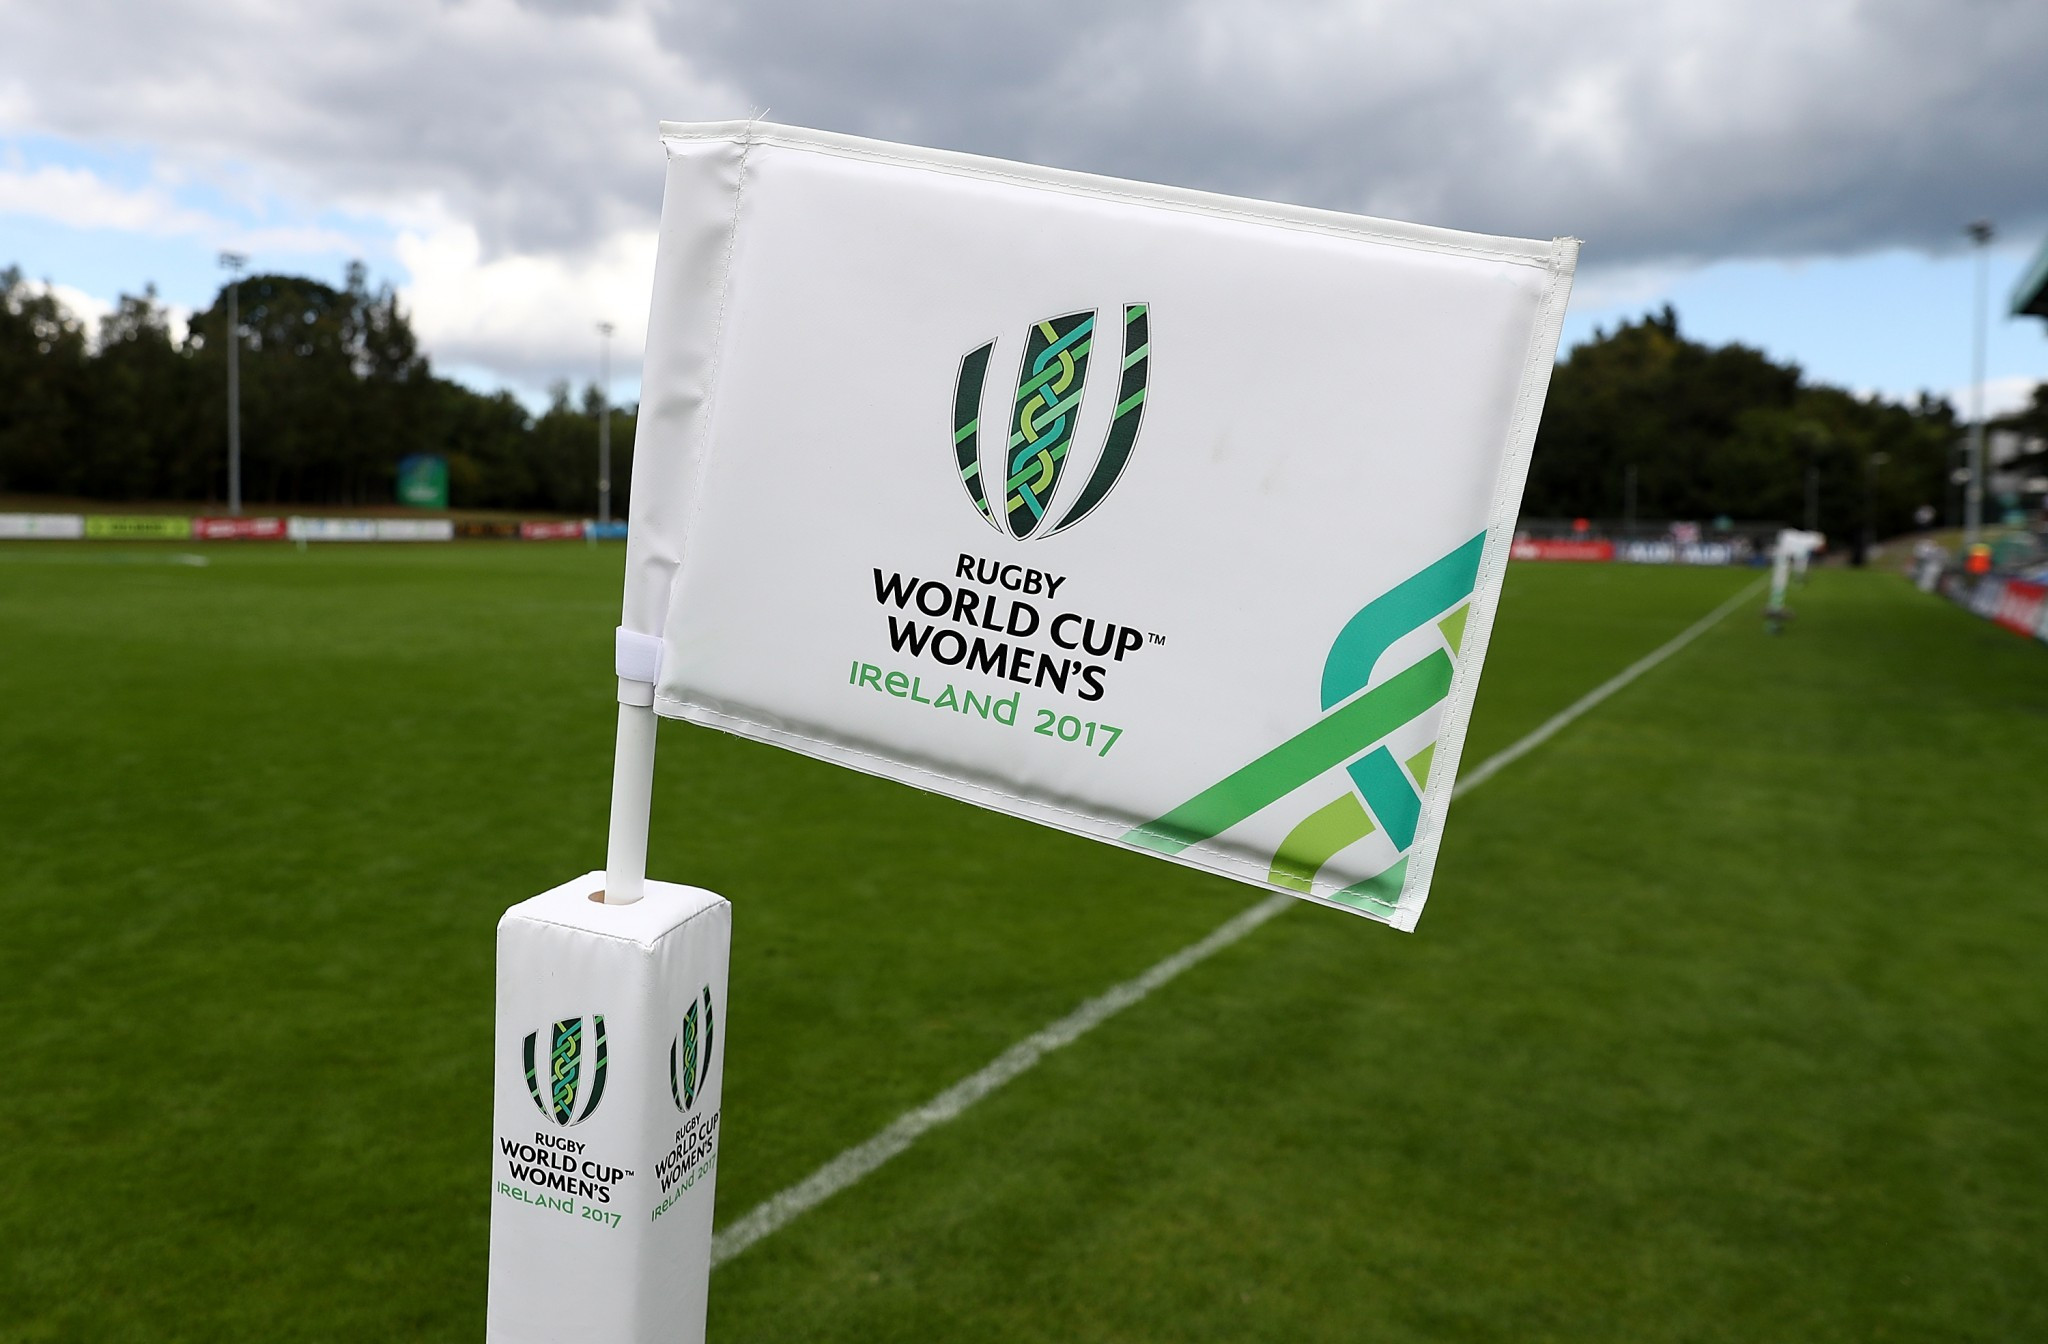 World Rugby implement anti-corruption strategy for 2017 Women's World Cup